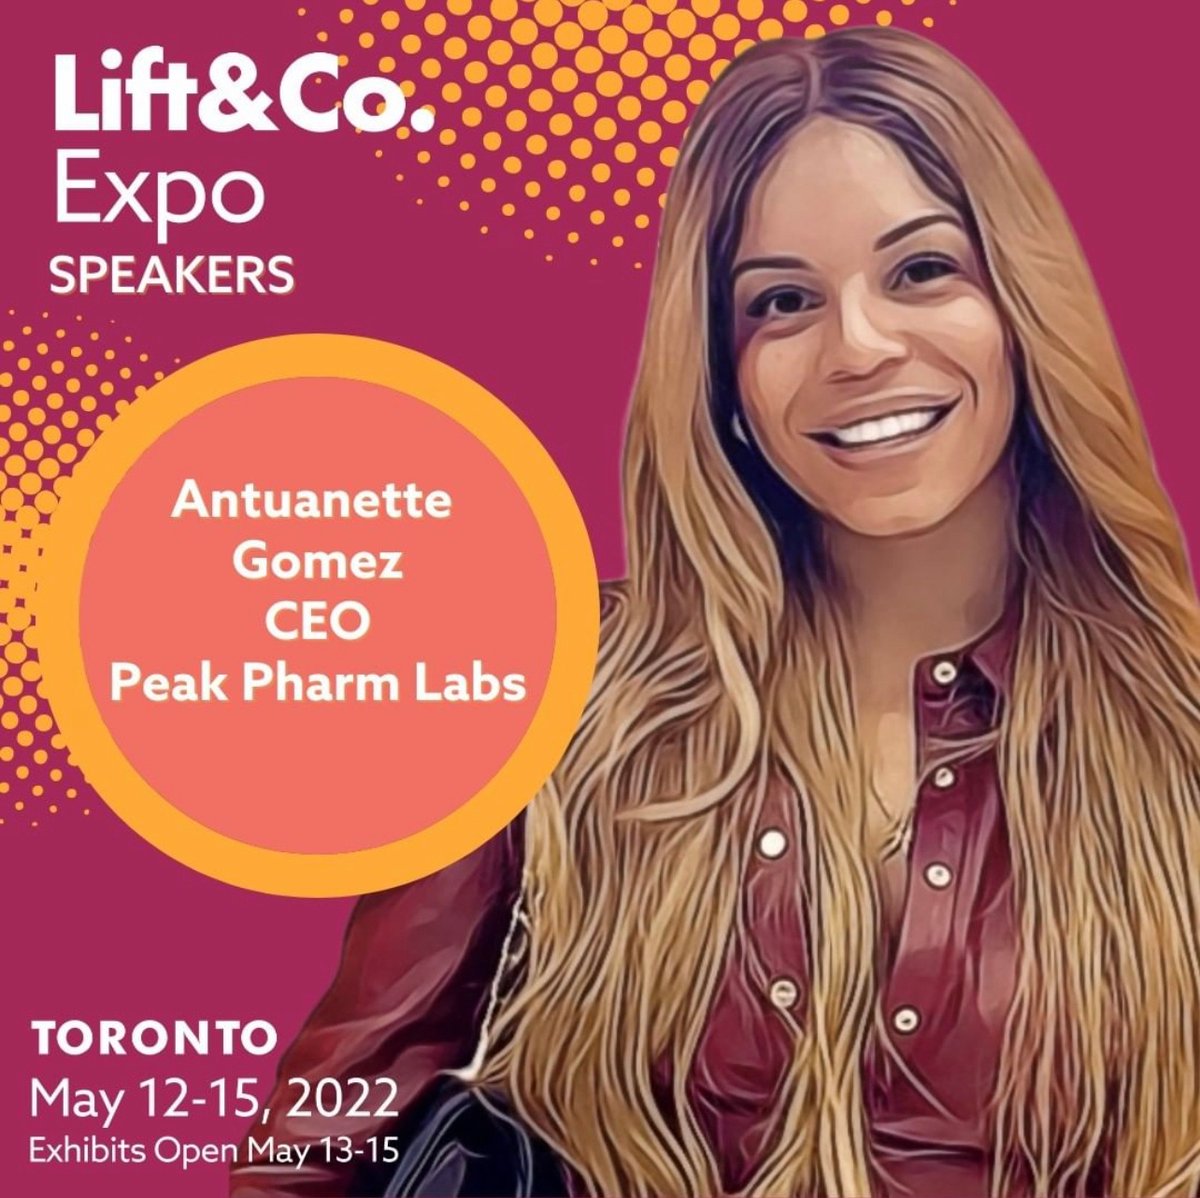 Are you ready to kick off the Lift Expo today?! 🚀 Canada’s Largest Cannabis Conference. I’ll be speaking on the Saturday + Sunday - make sure to say 👋 high if you see me 💋 *** Use the code FANDF10 for $10 off your ticket! *** Tickets: LiftExpo.ca